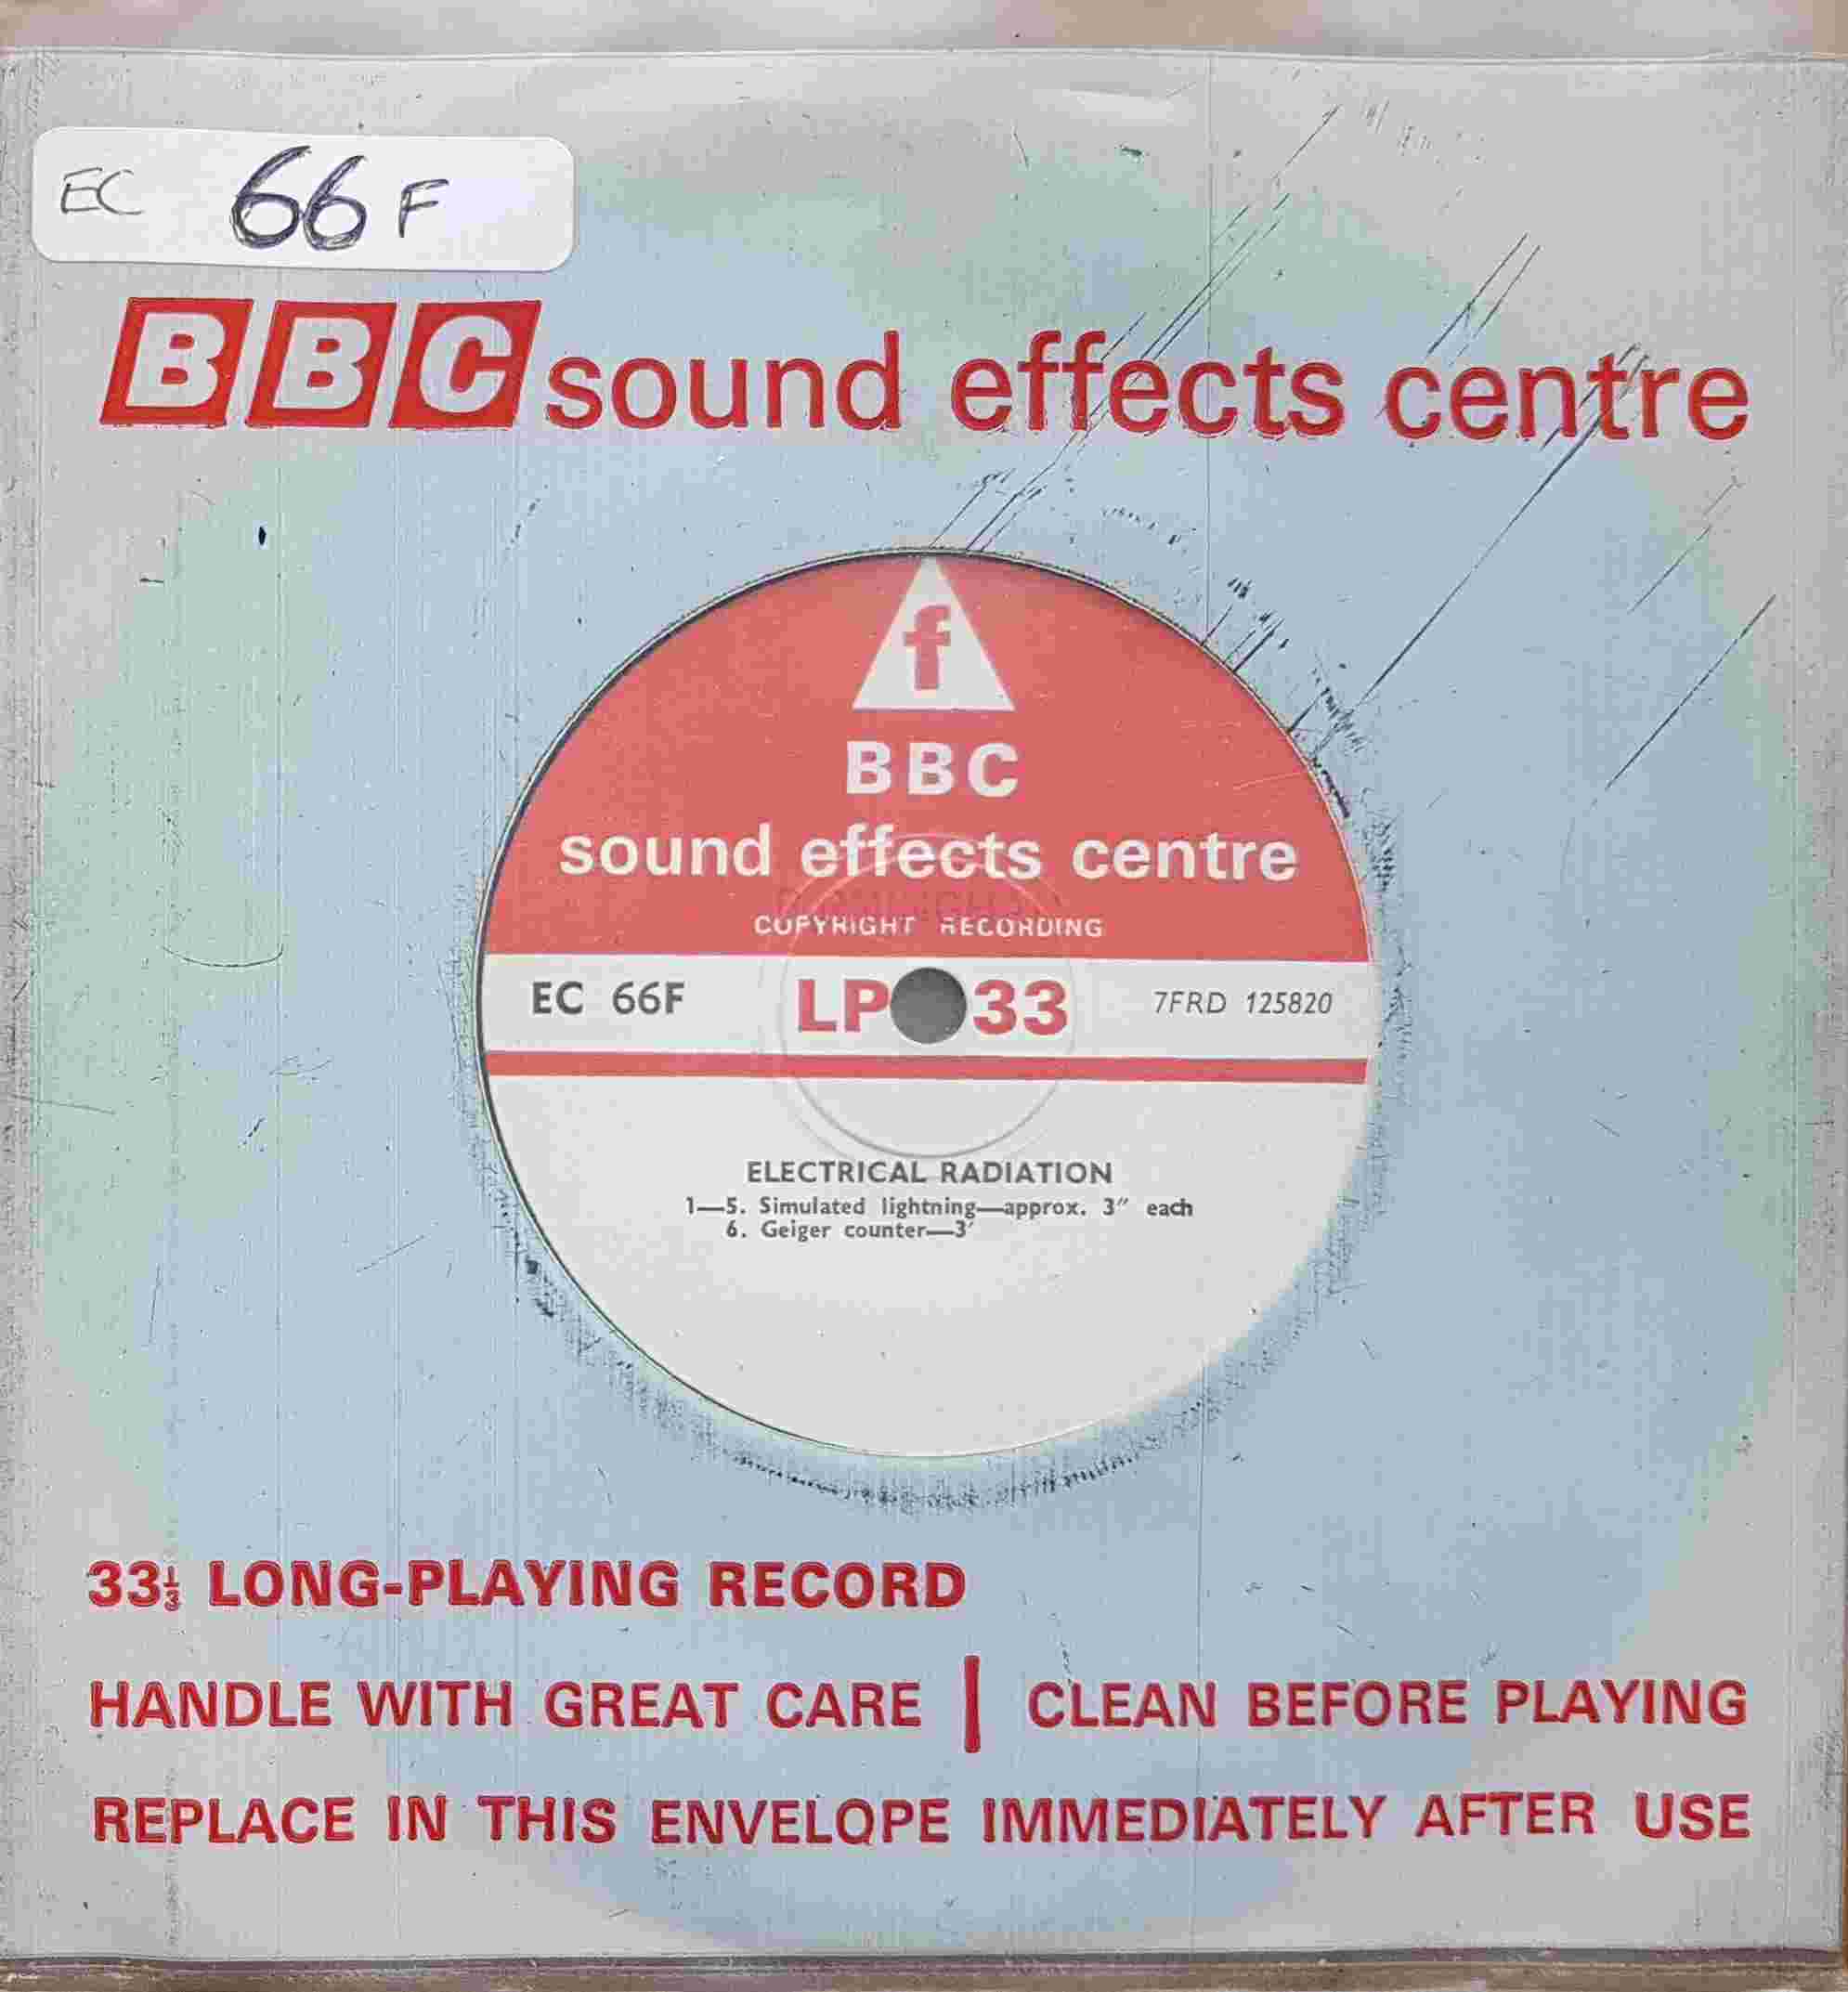 Picture of EC 66F Electrical radiation by artist Not registered from the BBC singles - Records and Tapes library